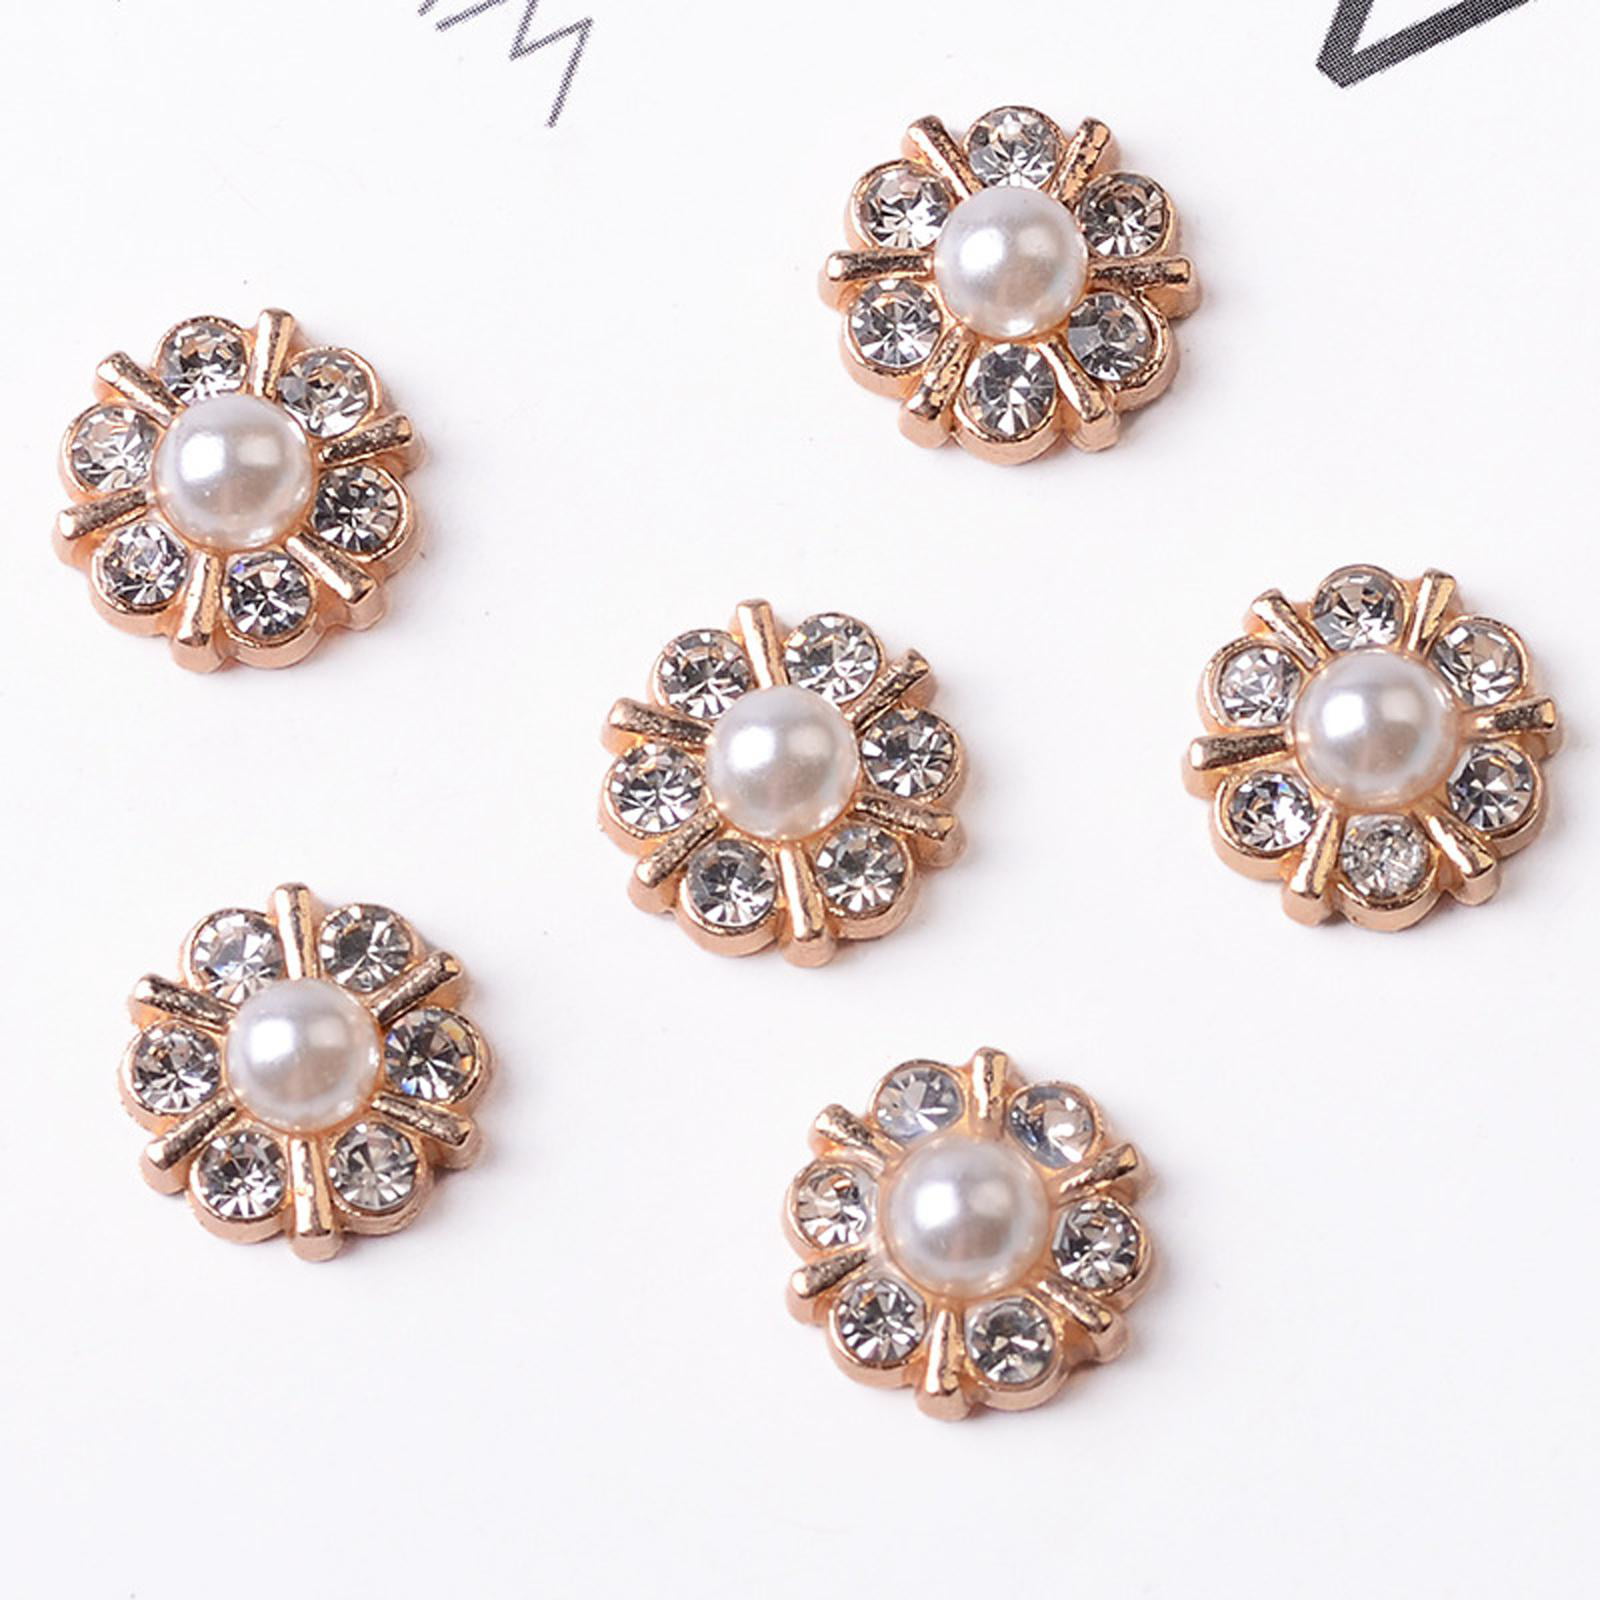 50 Pcs Faux Pearl Buttons Rhinestones Embellishments Retro Flatback  Rhinestone Buttons Vintage Buttons with Faux Pearls Crystal Flower Buttons  for DIY